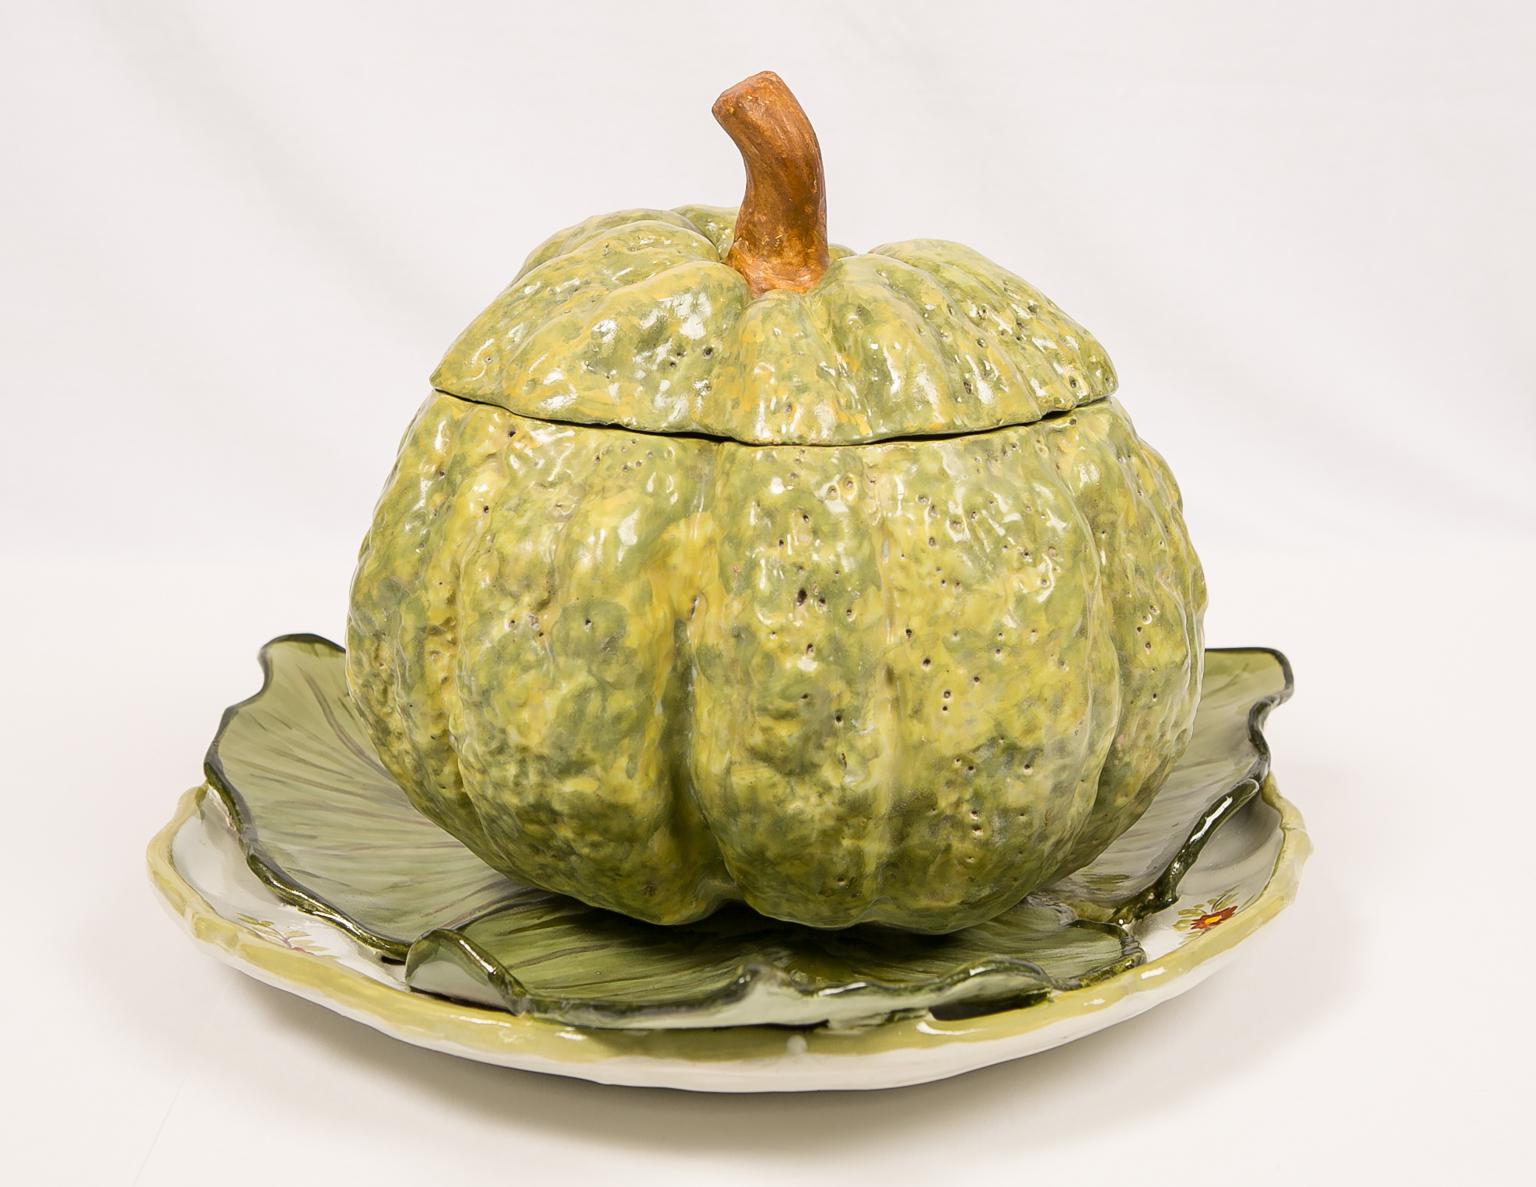 Antique French faience tureen modeled as a pumpkin on a bed of leaves. 
We were so excited to find this extraordinary 18th century Strasbourg tureen. Made circa 1770 it is modeled naturalistically and painted in shades of green highlighted with